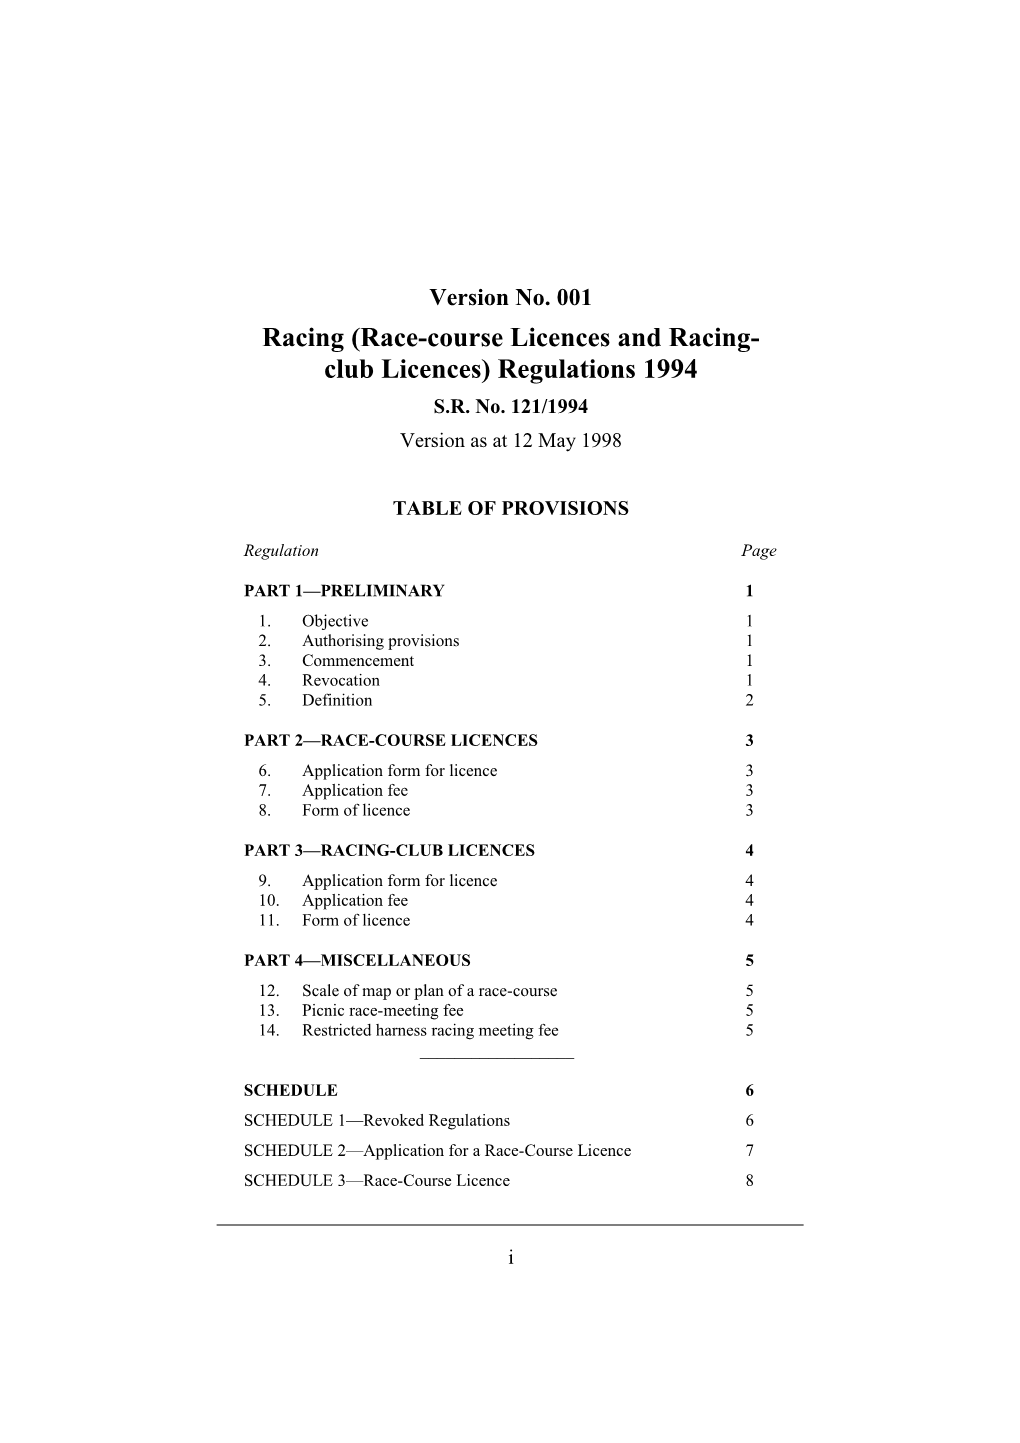 Racing (Race-Course Licences and Racing-Club Licences) Regulations 1994